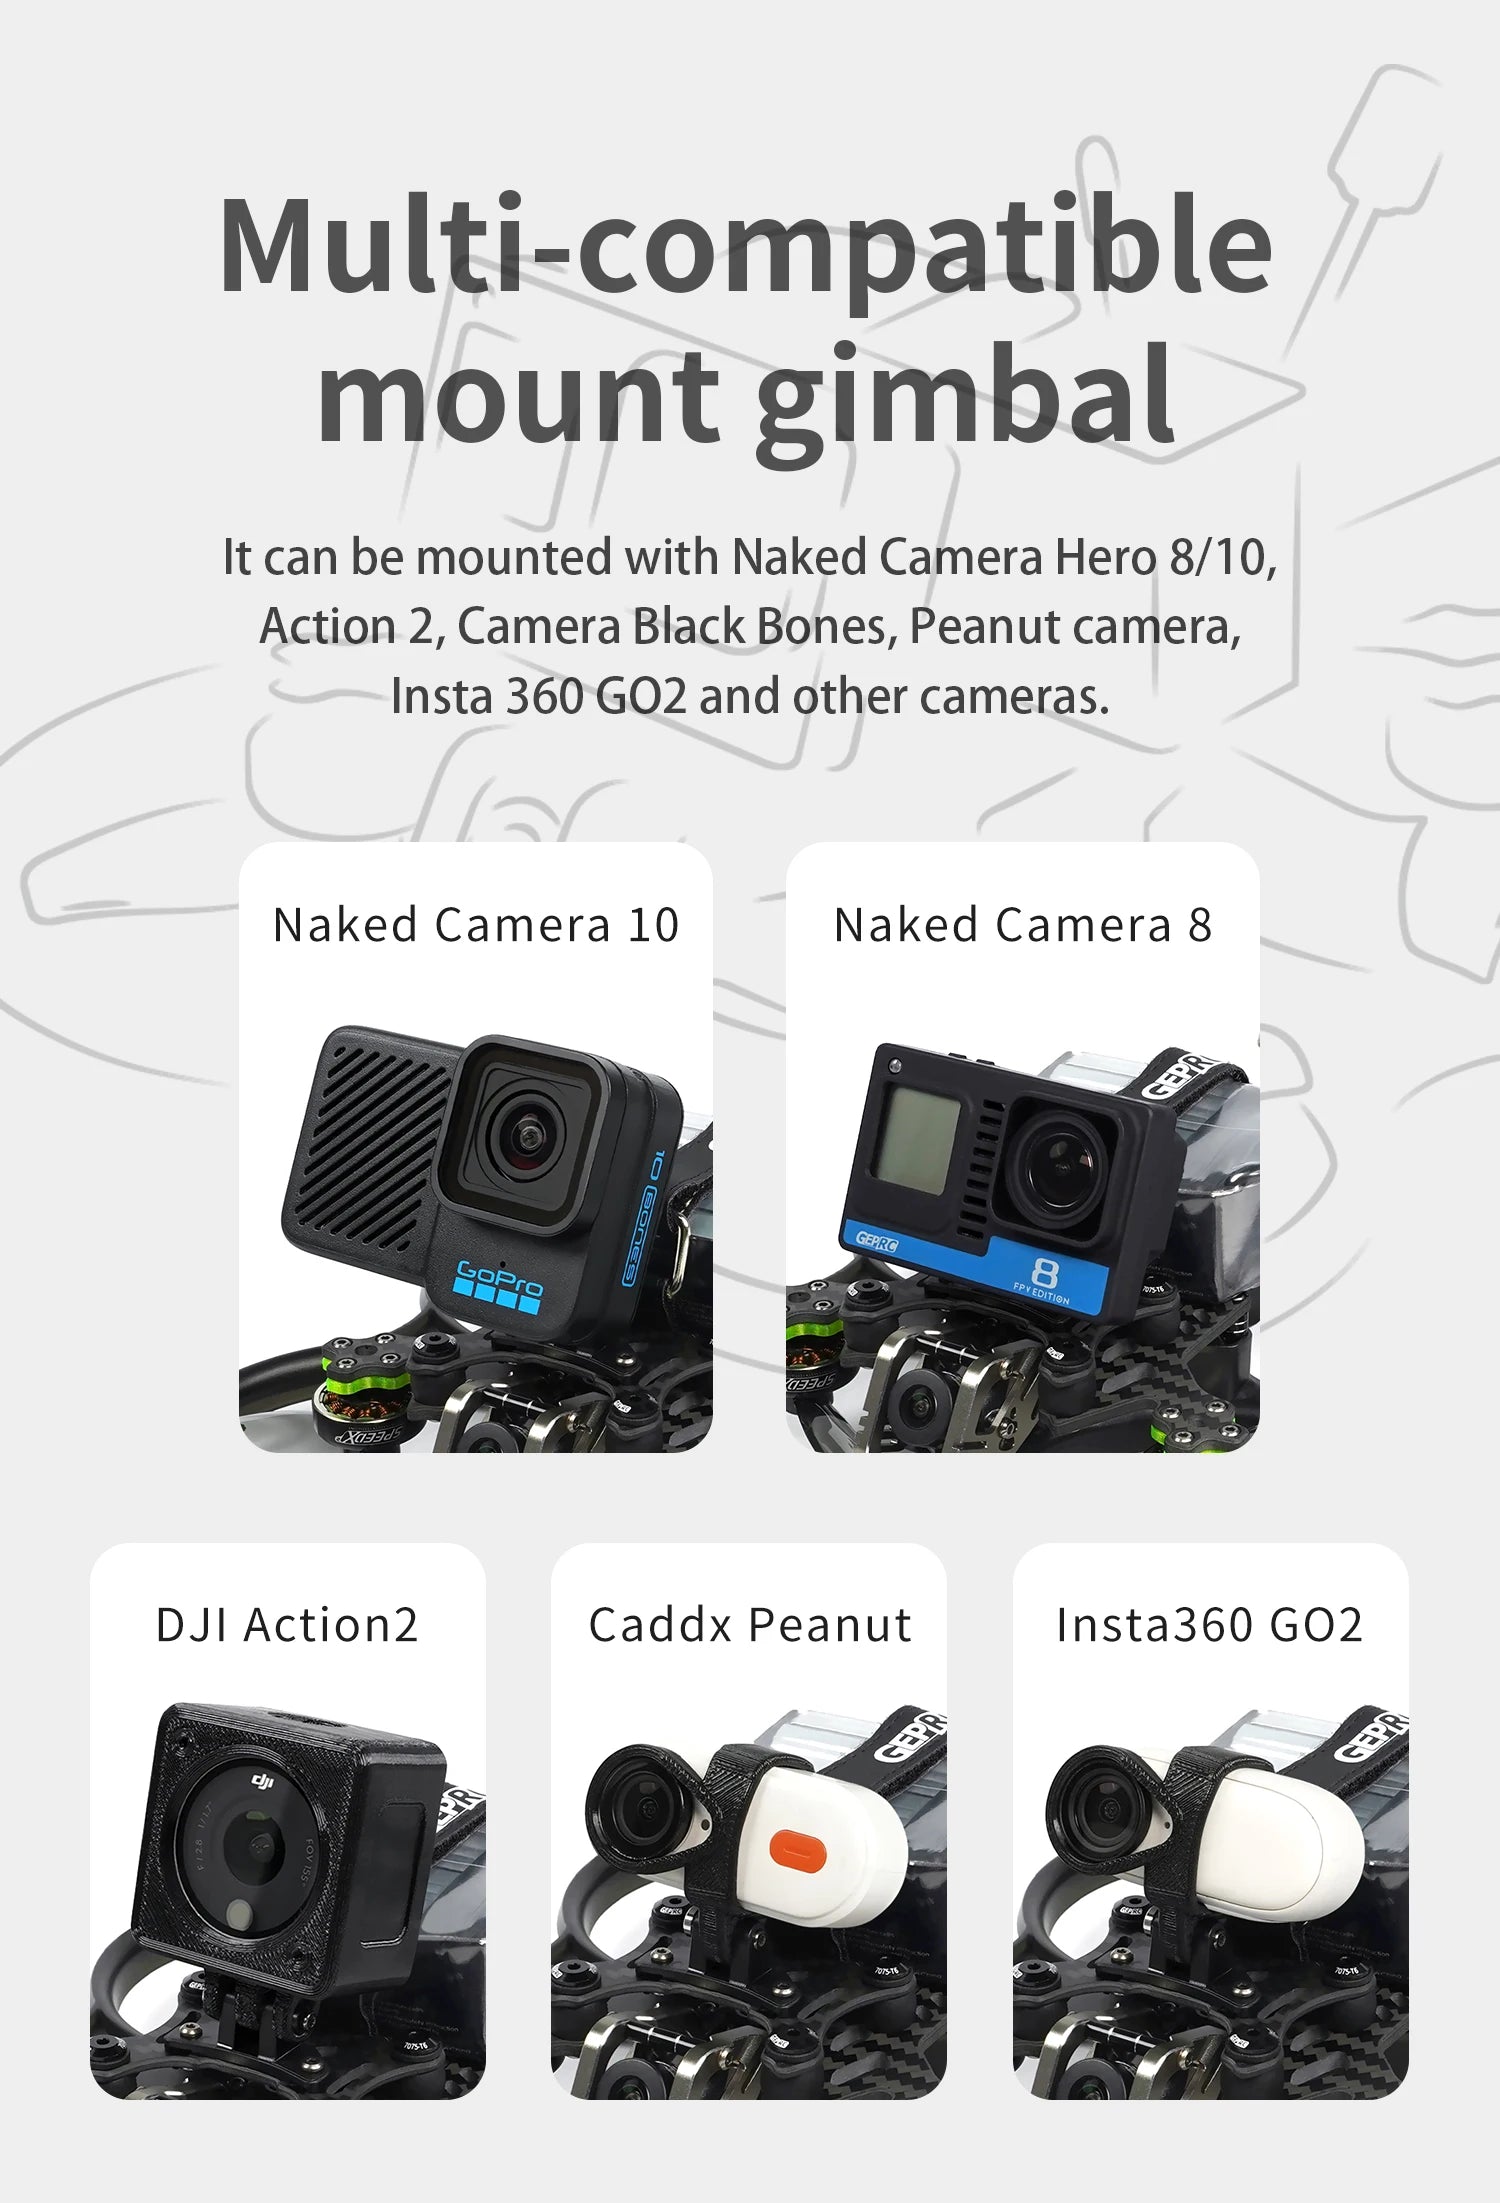 GEPRC Cinebot30 HD - Runcam Link Wasp 4S FPV, GEPRC Cinebot30 HD, gimbal can be mounted with Naked Camera Hero 8/10, Action 2, Camera Black